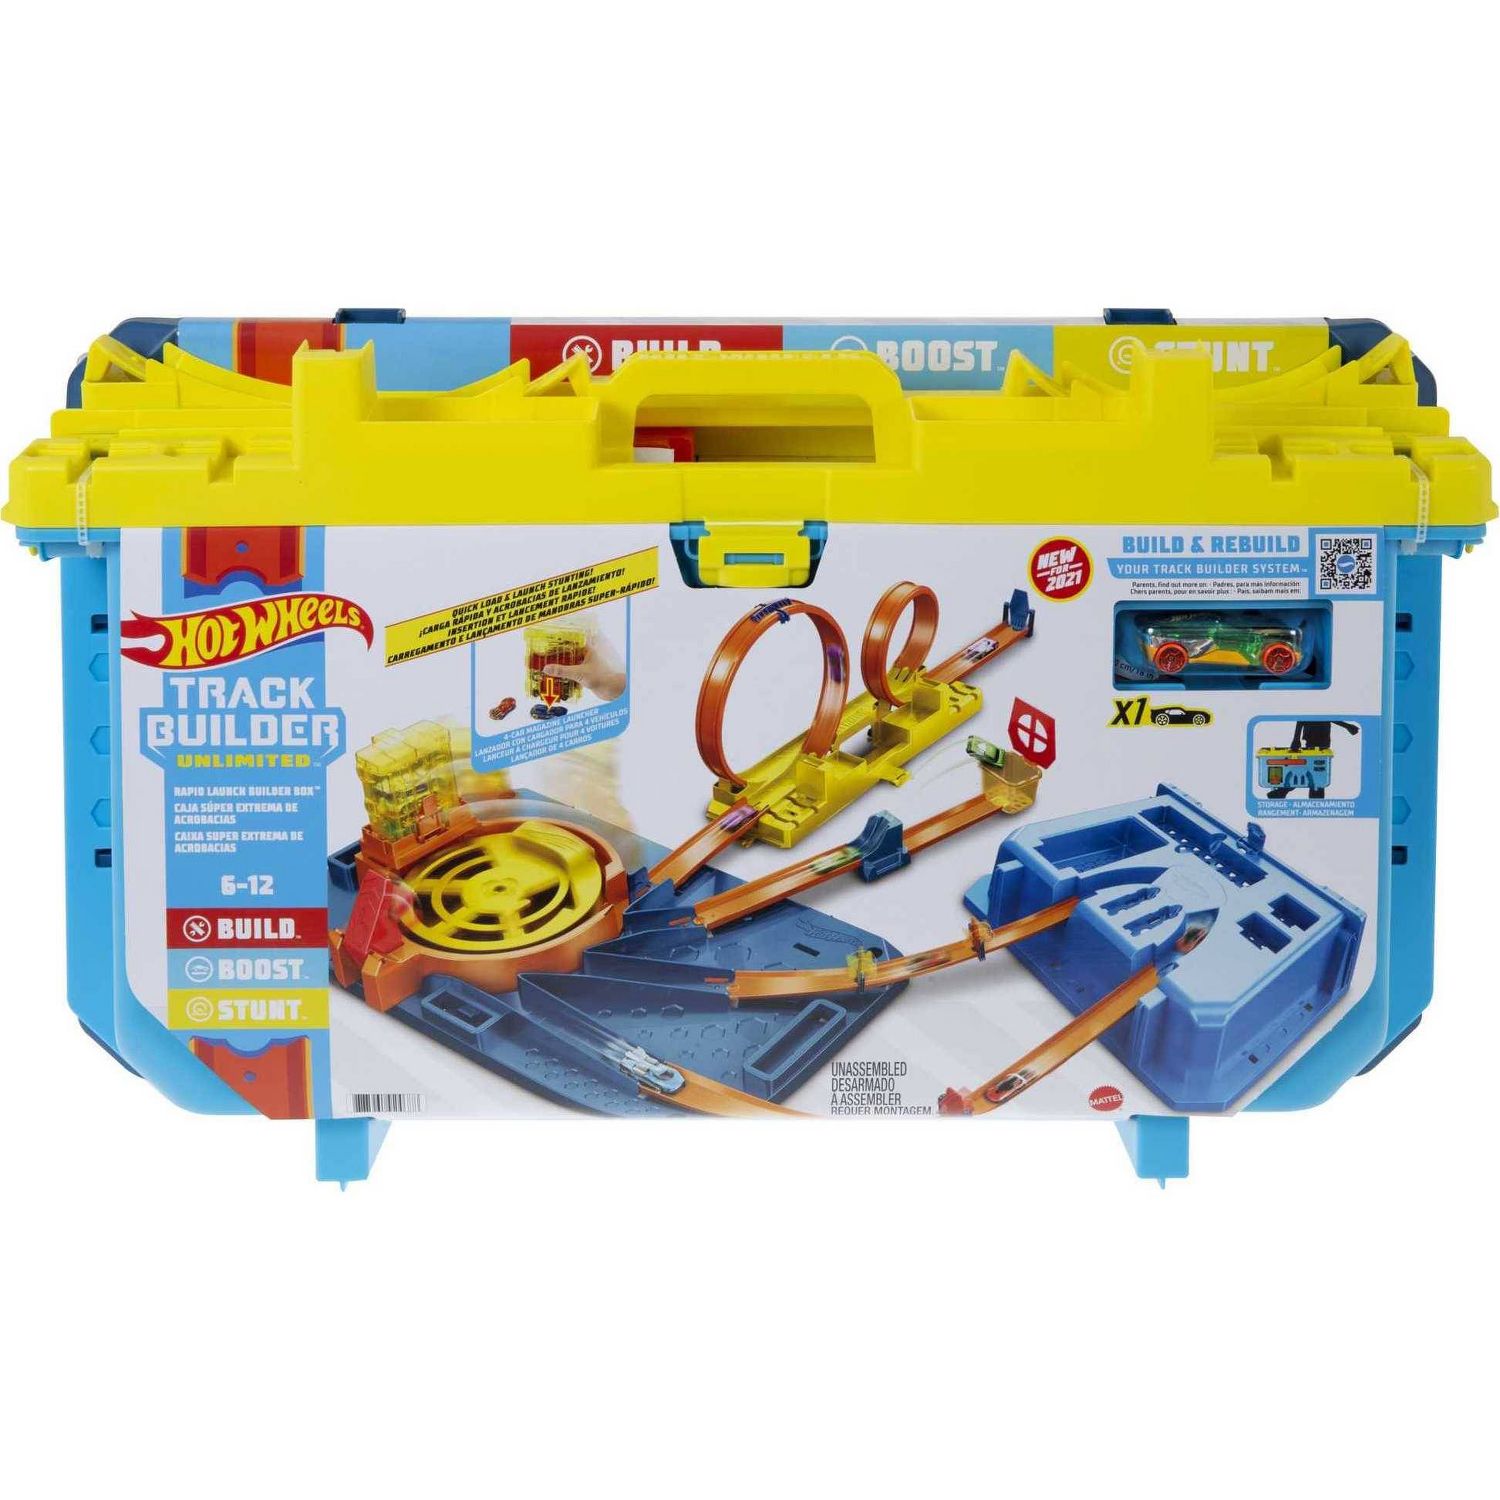 Hot Wheels Track Builder Unlimited Rapid Launch Builder Box Track Set - $17.49 at Target